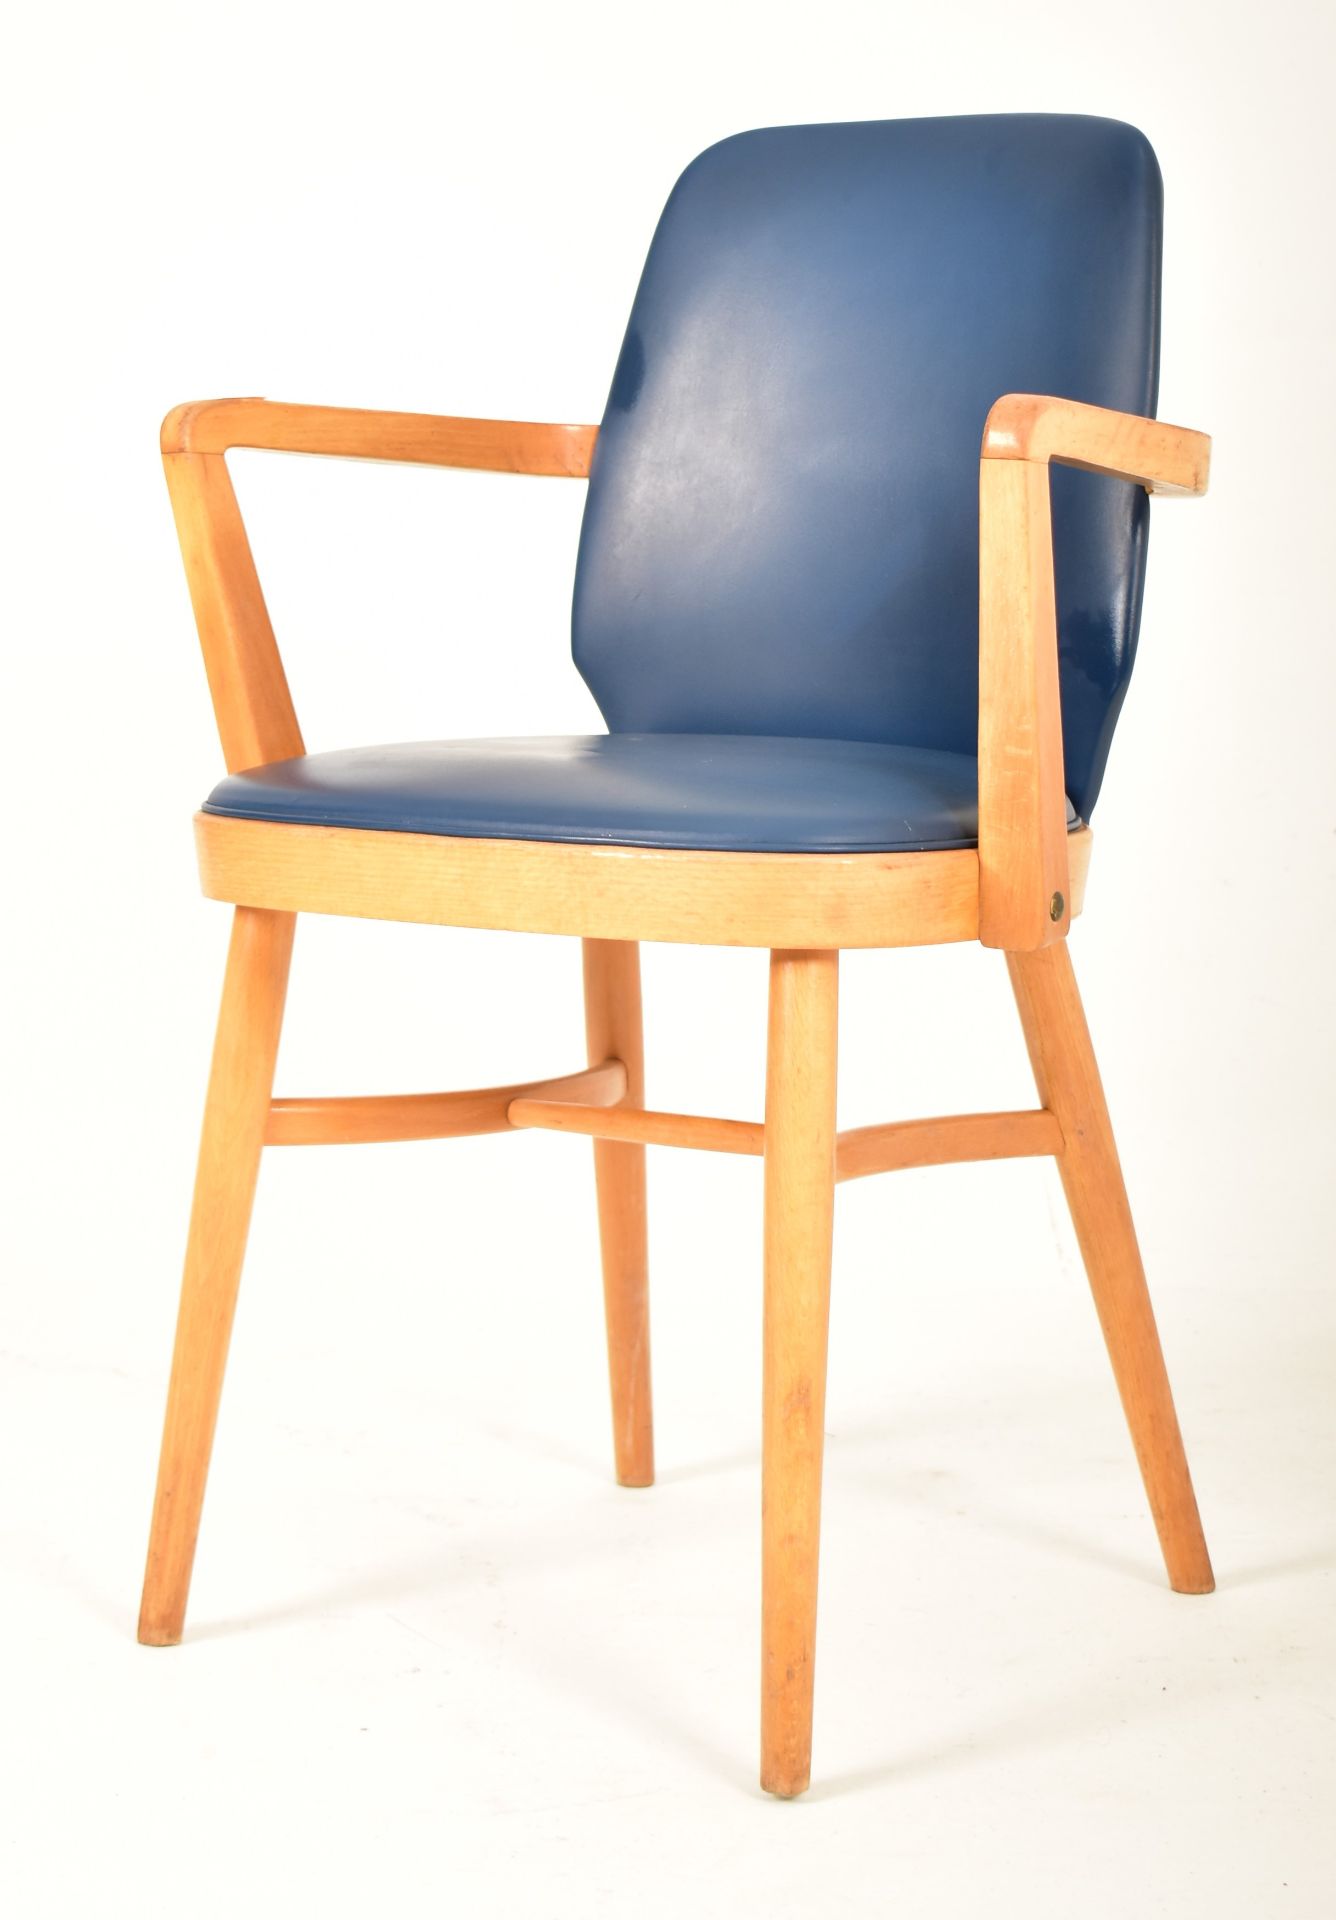 BEN CHAIRS - SET OF THREE RETRO BEECH FRAMED DINING CHAIRS - Image 7 of 7